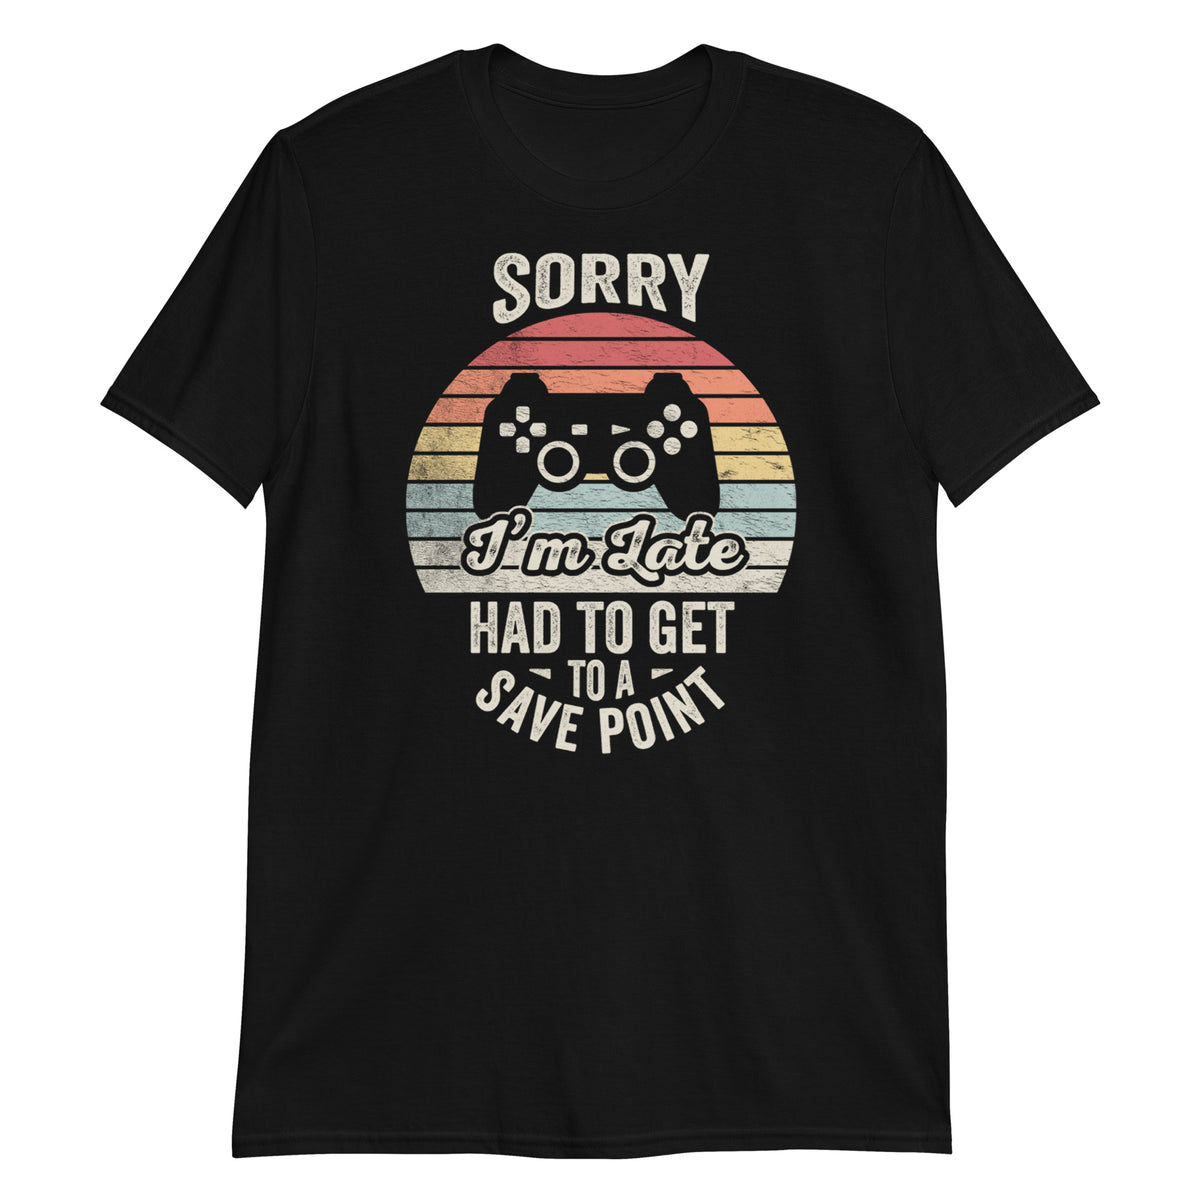 Sorry I'm Late Had to Get to Save Point T-Shirt